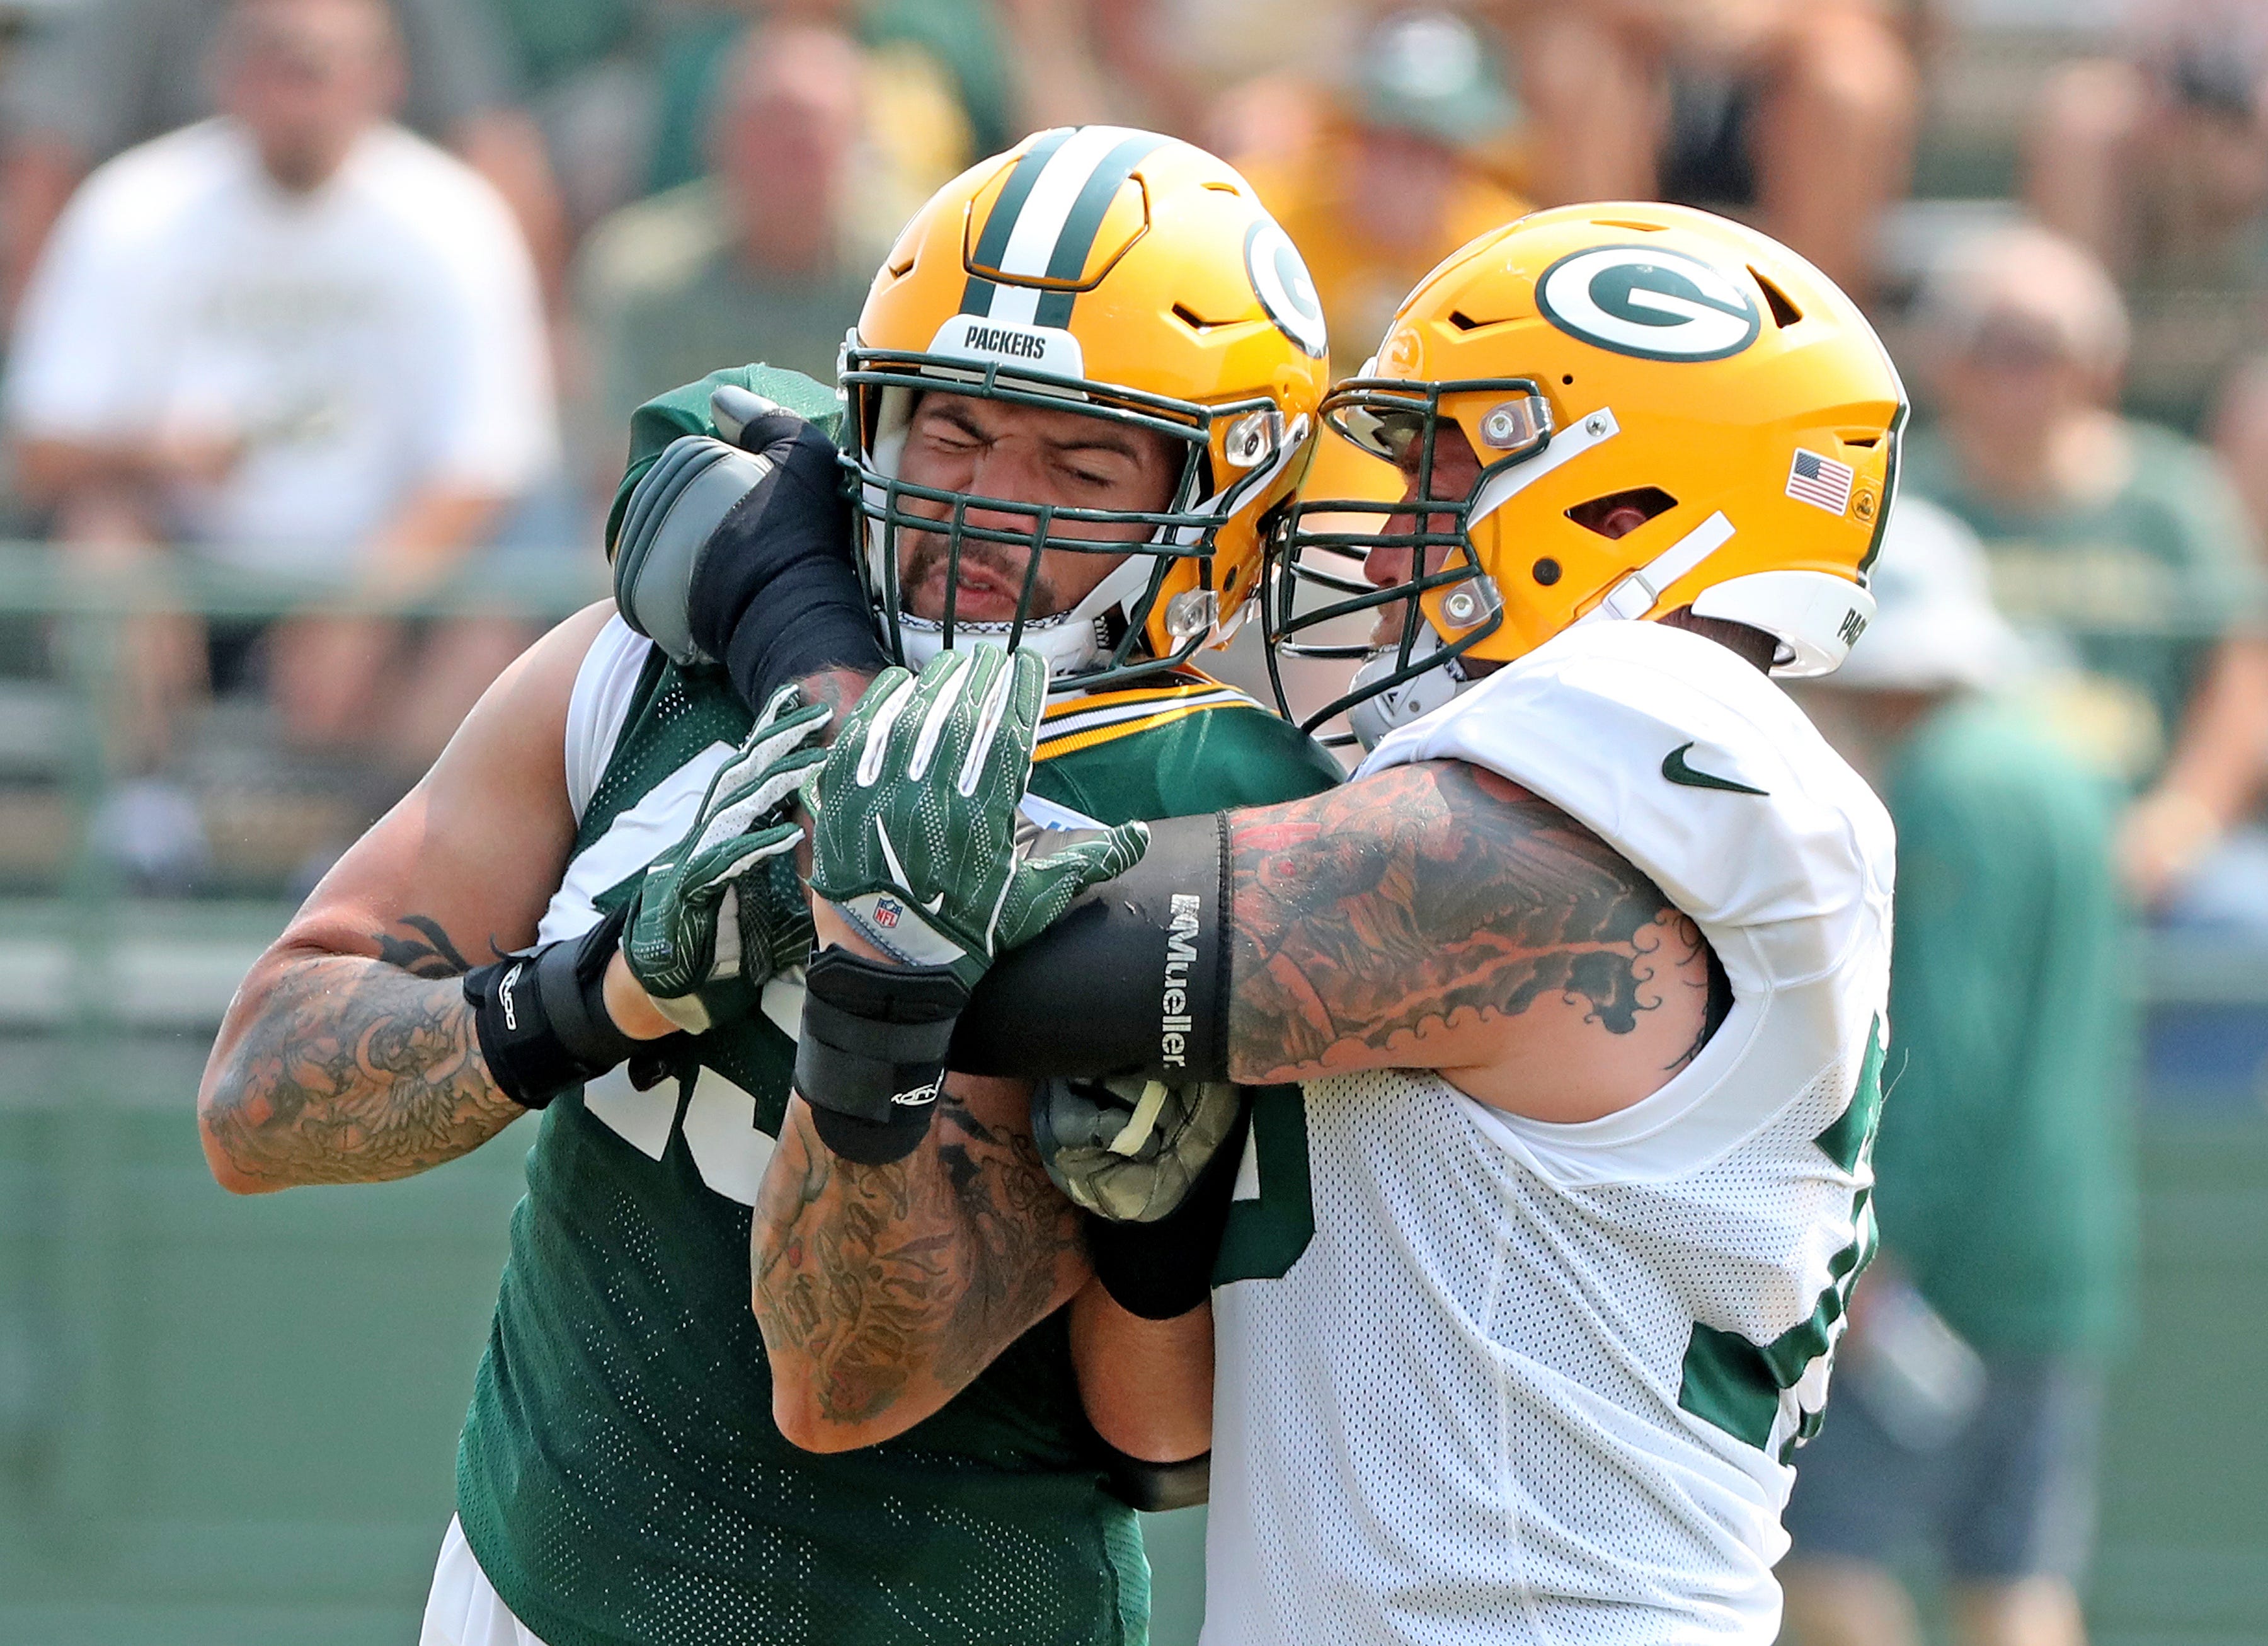 Green Bay Packers offensive tackle Jason Spriggs, right, grapples with linebacker James Hearns during NFL football training camp at Ray Nitschke Field in Ashwaubenon, Wis.